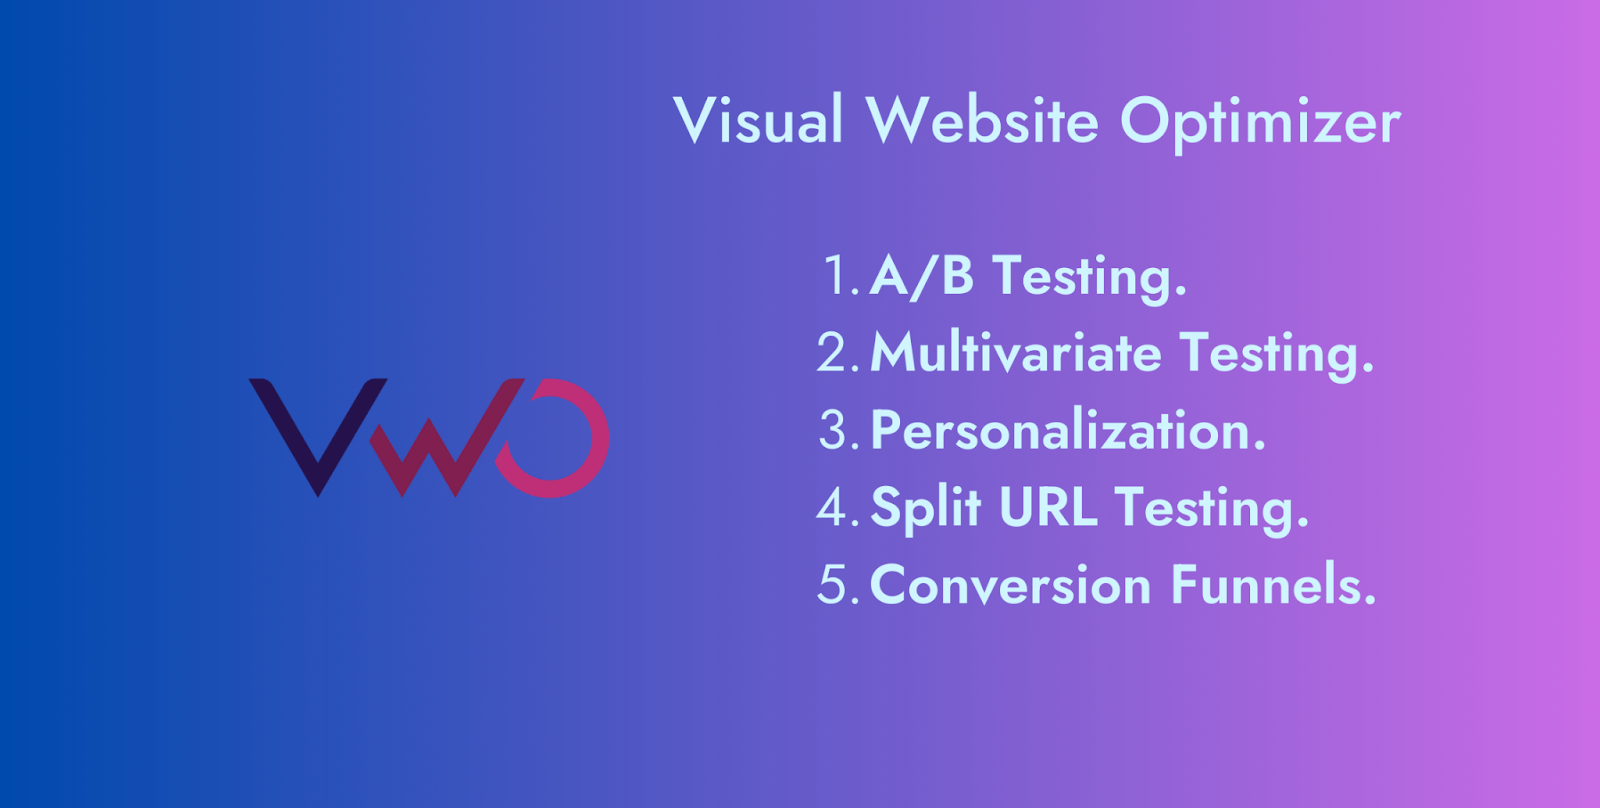 Features of VWO (CRO top tool)